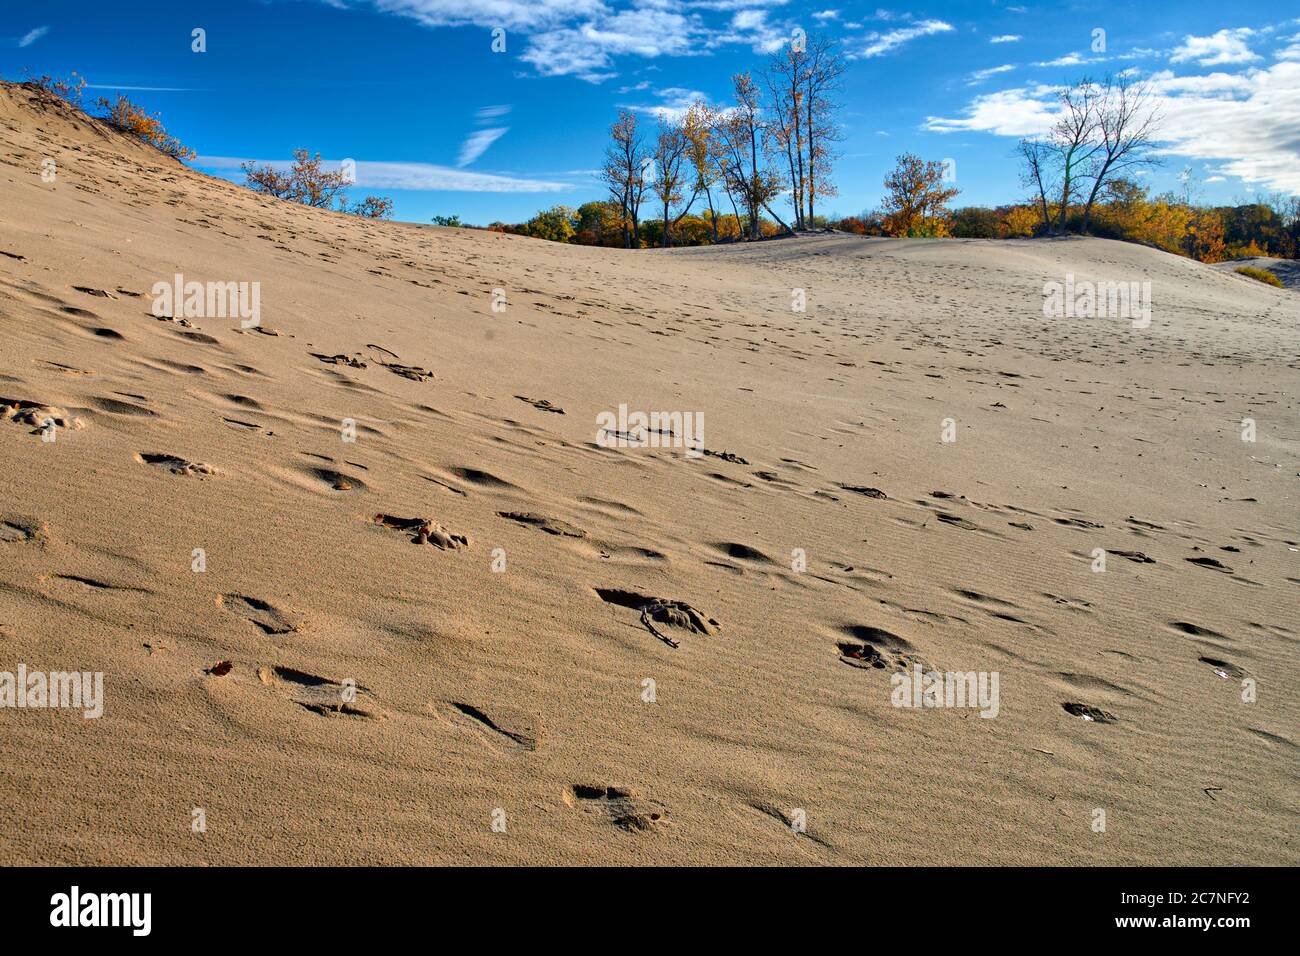 Footprints on the sand dune background landscape with autumn leaf color and blue sky Stock Photo